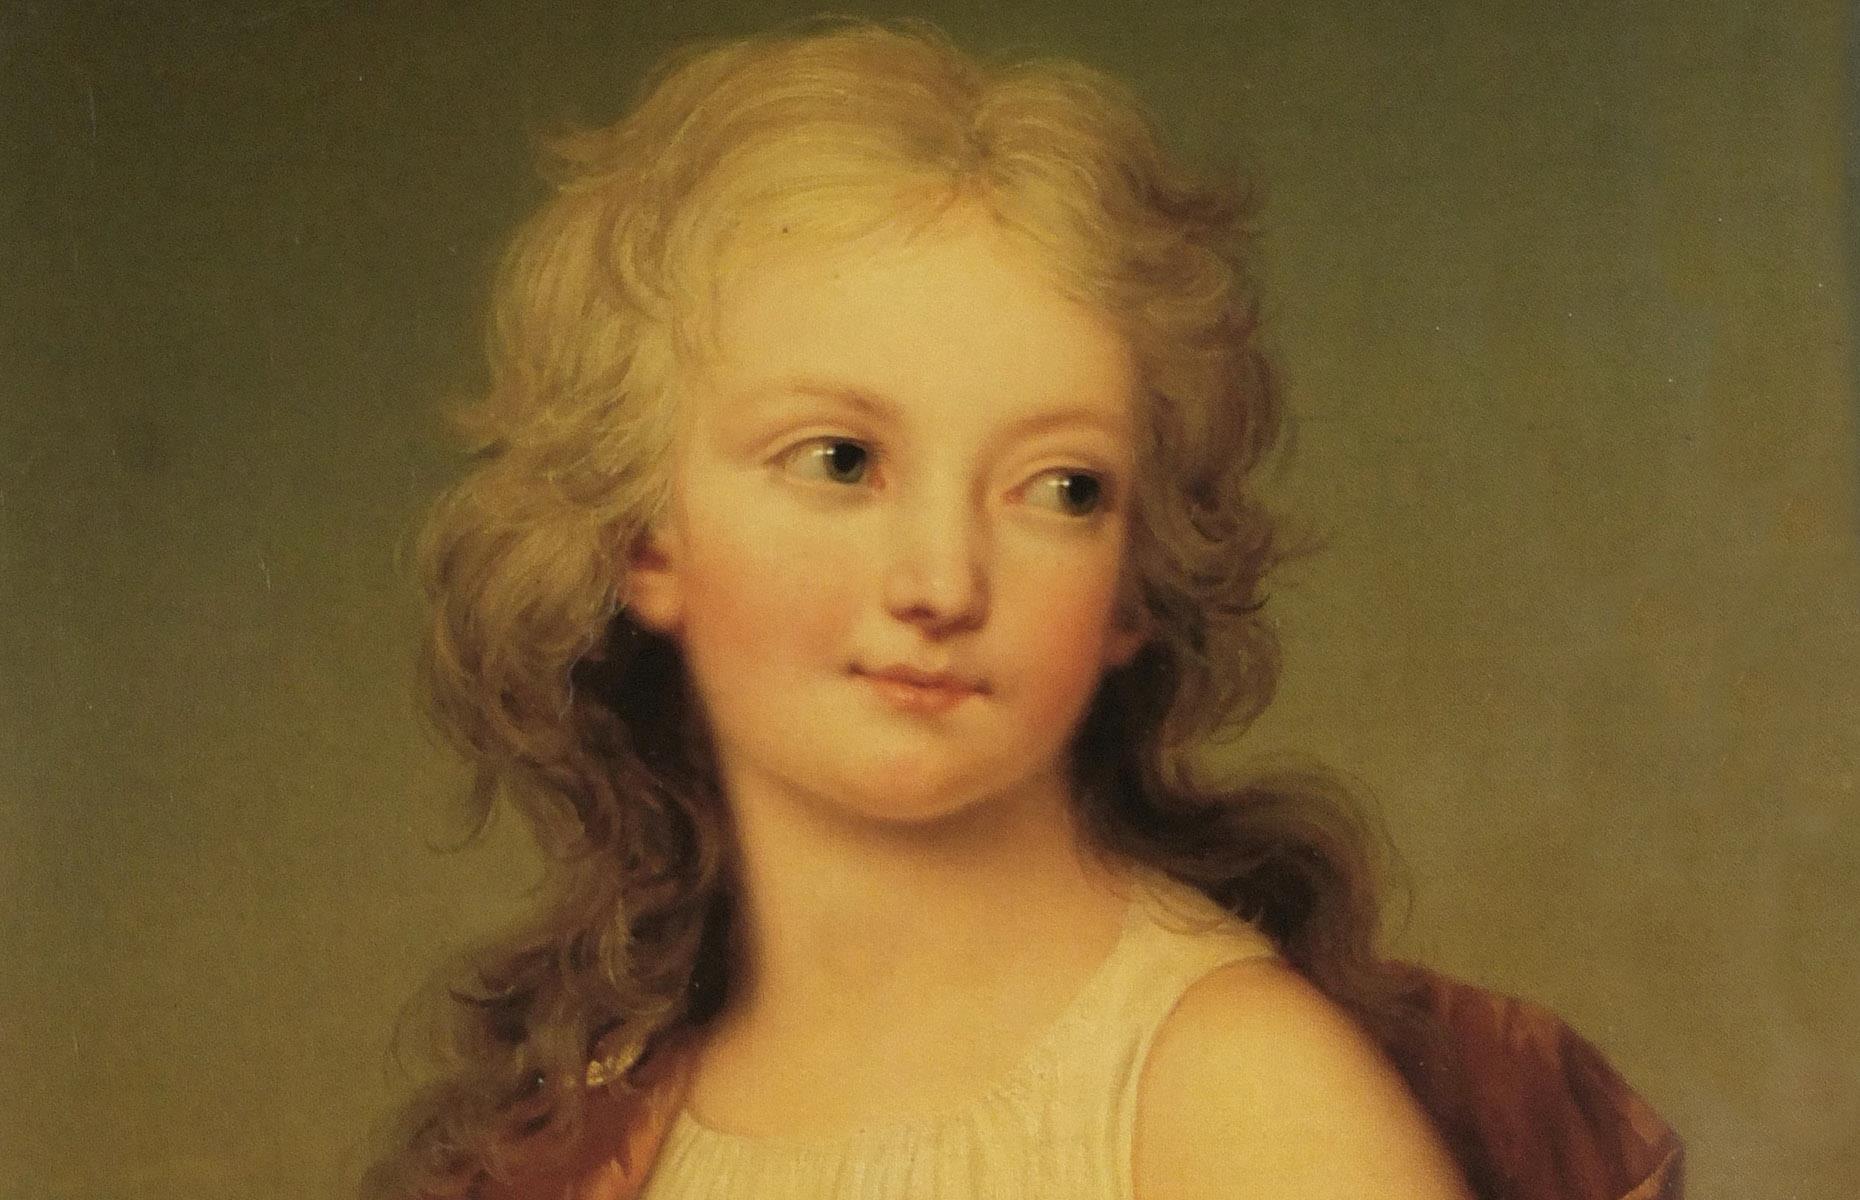 <p>Marie Antoinette and Louis XVI were also patrons of a charity called the Maison Philanthropique, which provided aid to widows, the elderly, and blind people.</p>  <p>During a famine, the royal couple also sold their expensive flatware to buy food for their subjects and ate lower-quality bread themselves to ensure there was more available for the needy.</p>  <p>In addition, the queen is said to have taught her daughter, Marie-Thérèse-Charlotte (pictured), values centered around kindness. She emphasized the importance of caring for peasant children and allowed several peasant families to live on her hamlet farm. She also adopted several children over the course of her reign.</p>